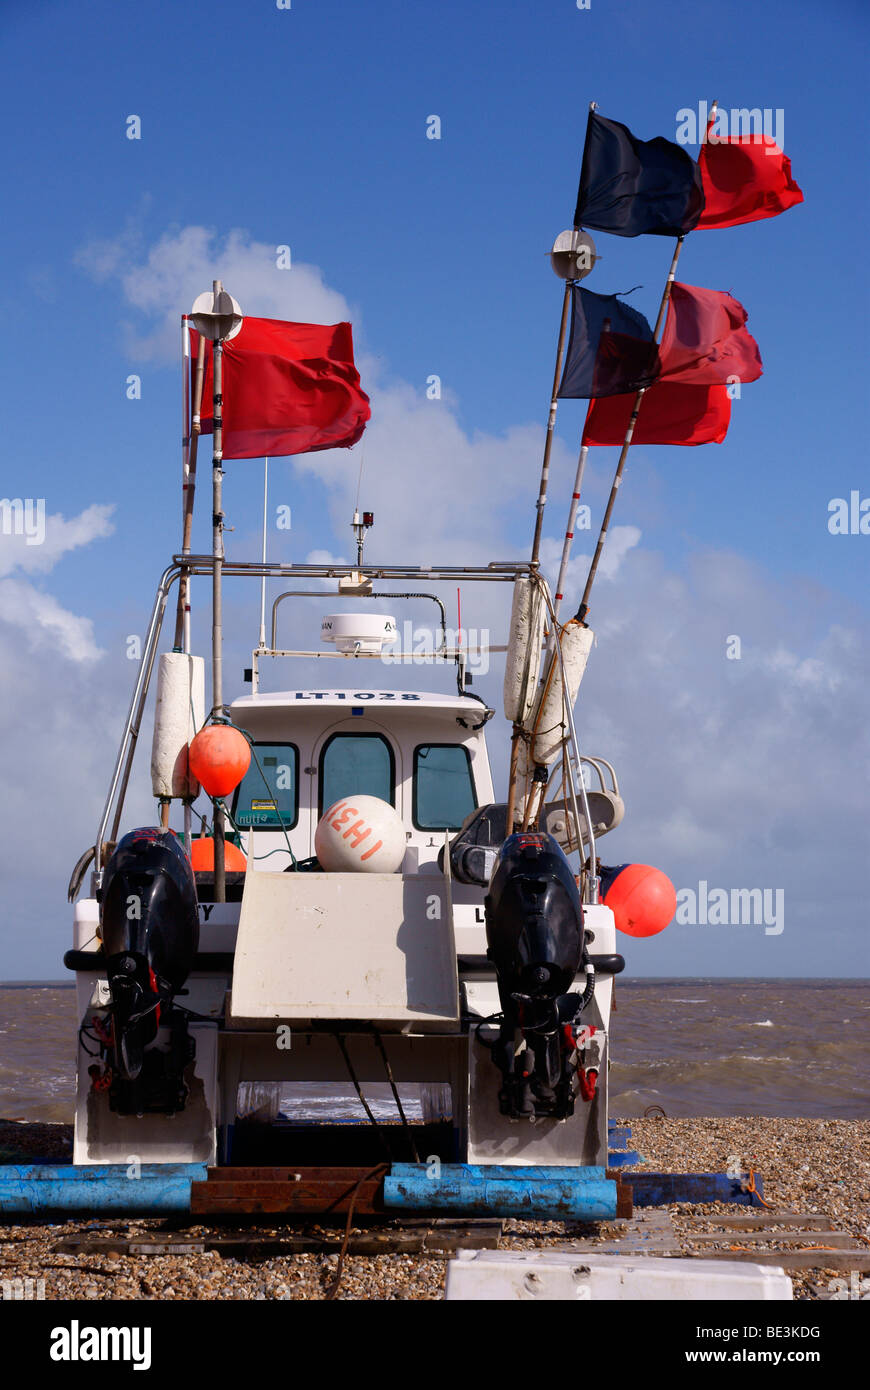 Fishing boat with lobster pot marker flags fluttering in strong wind, on the beach at Aldeburgh Stock Photo